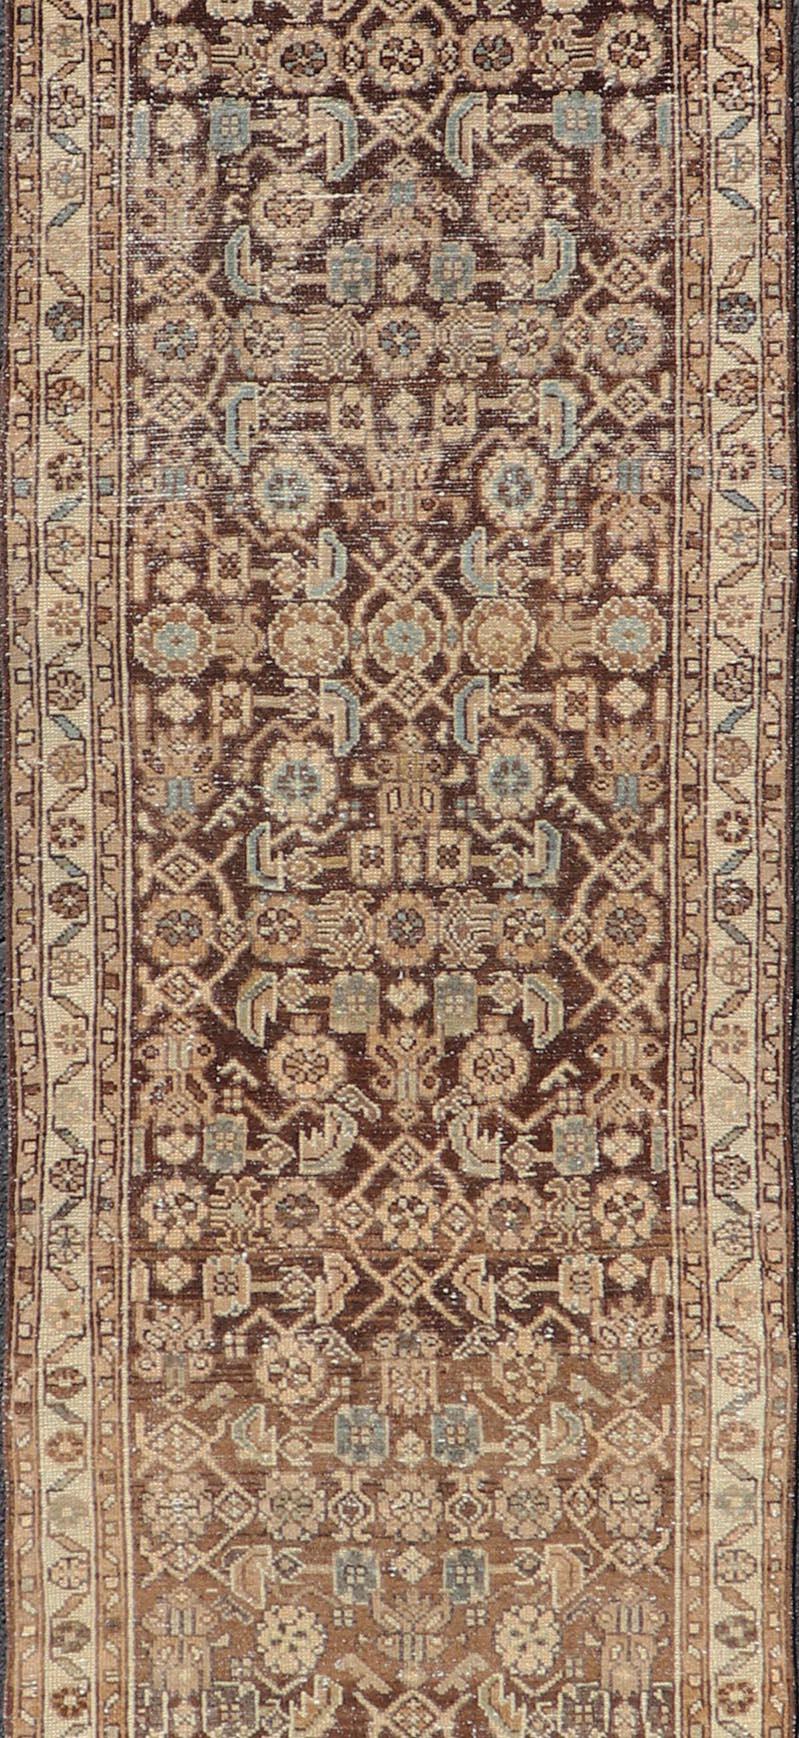 Hand-Knotted Antique Persian Hamadan Runner in Warm Tones of Grey, Brown, and L. Brown For Sale